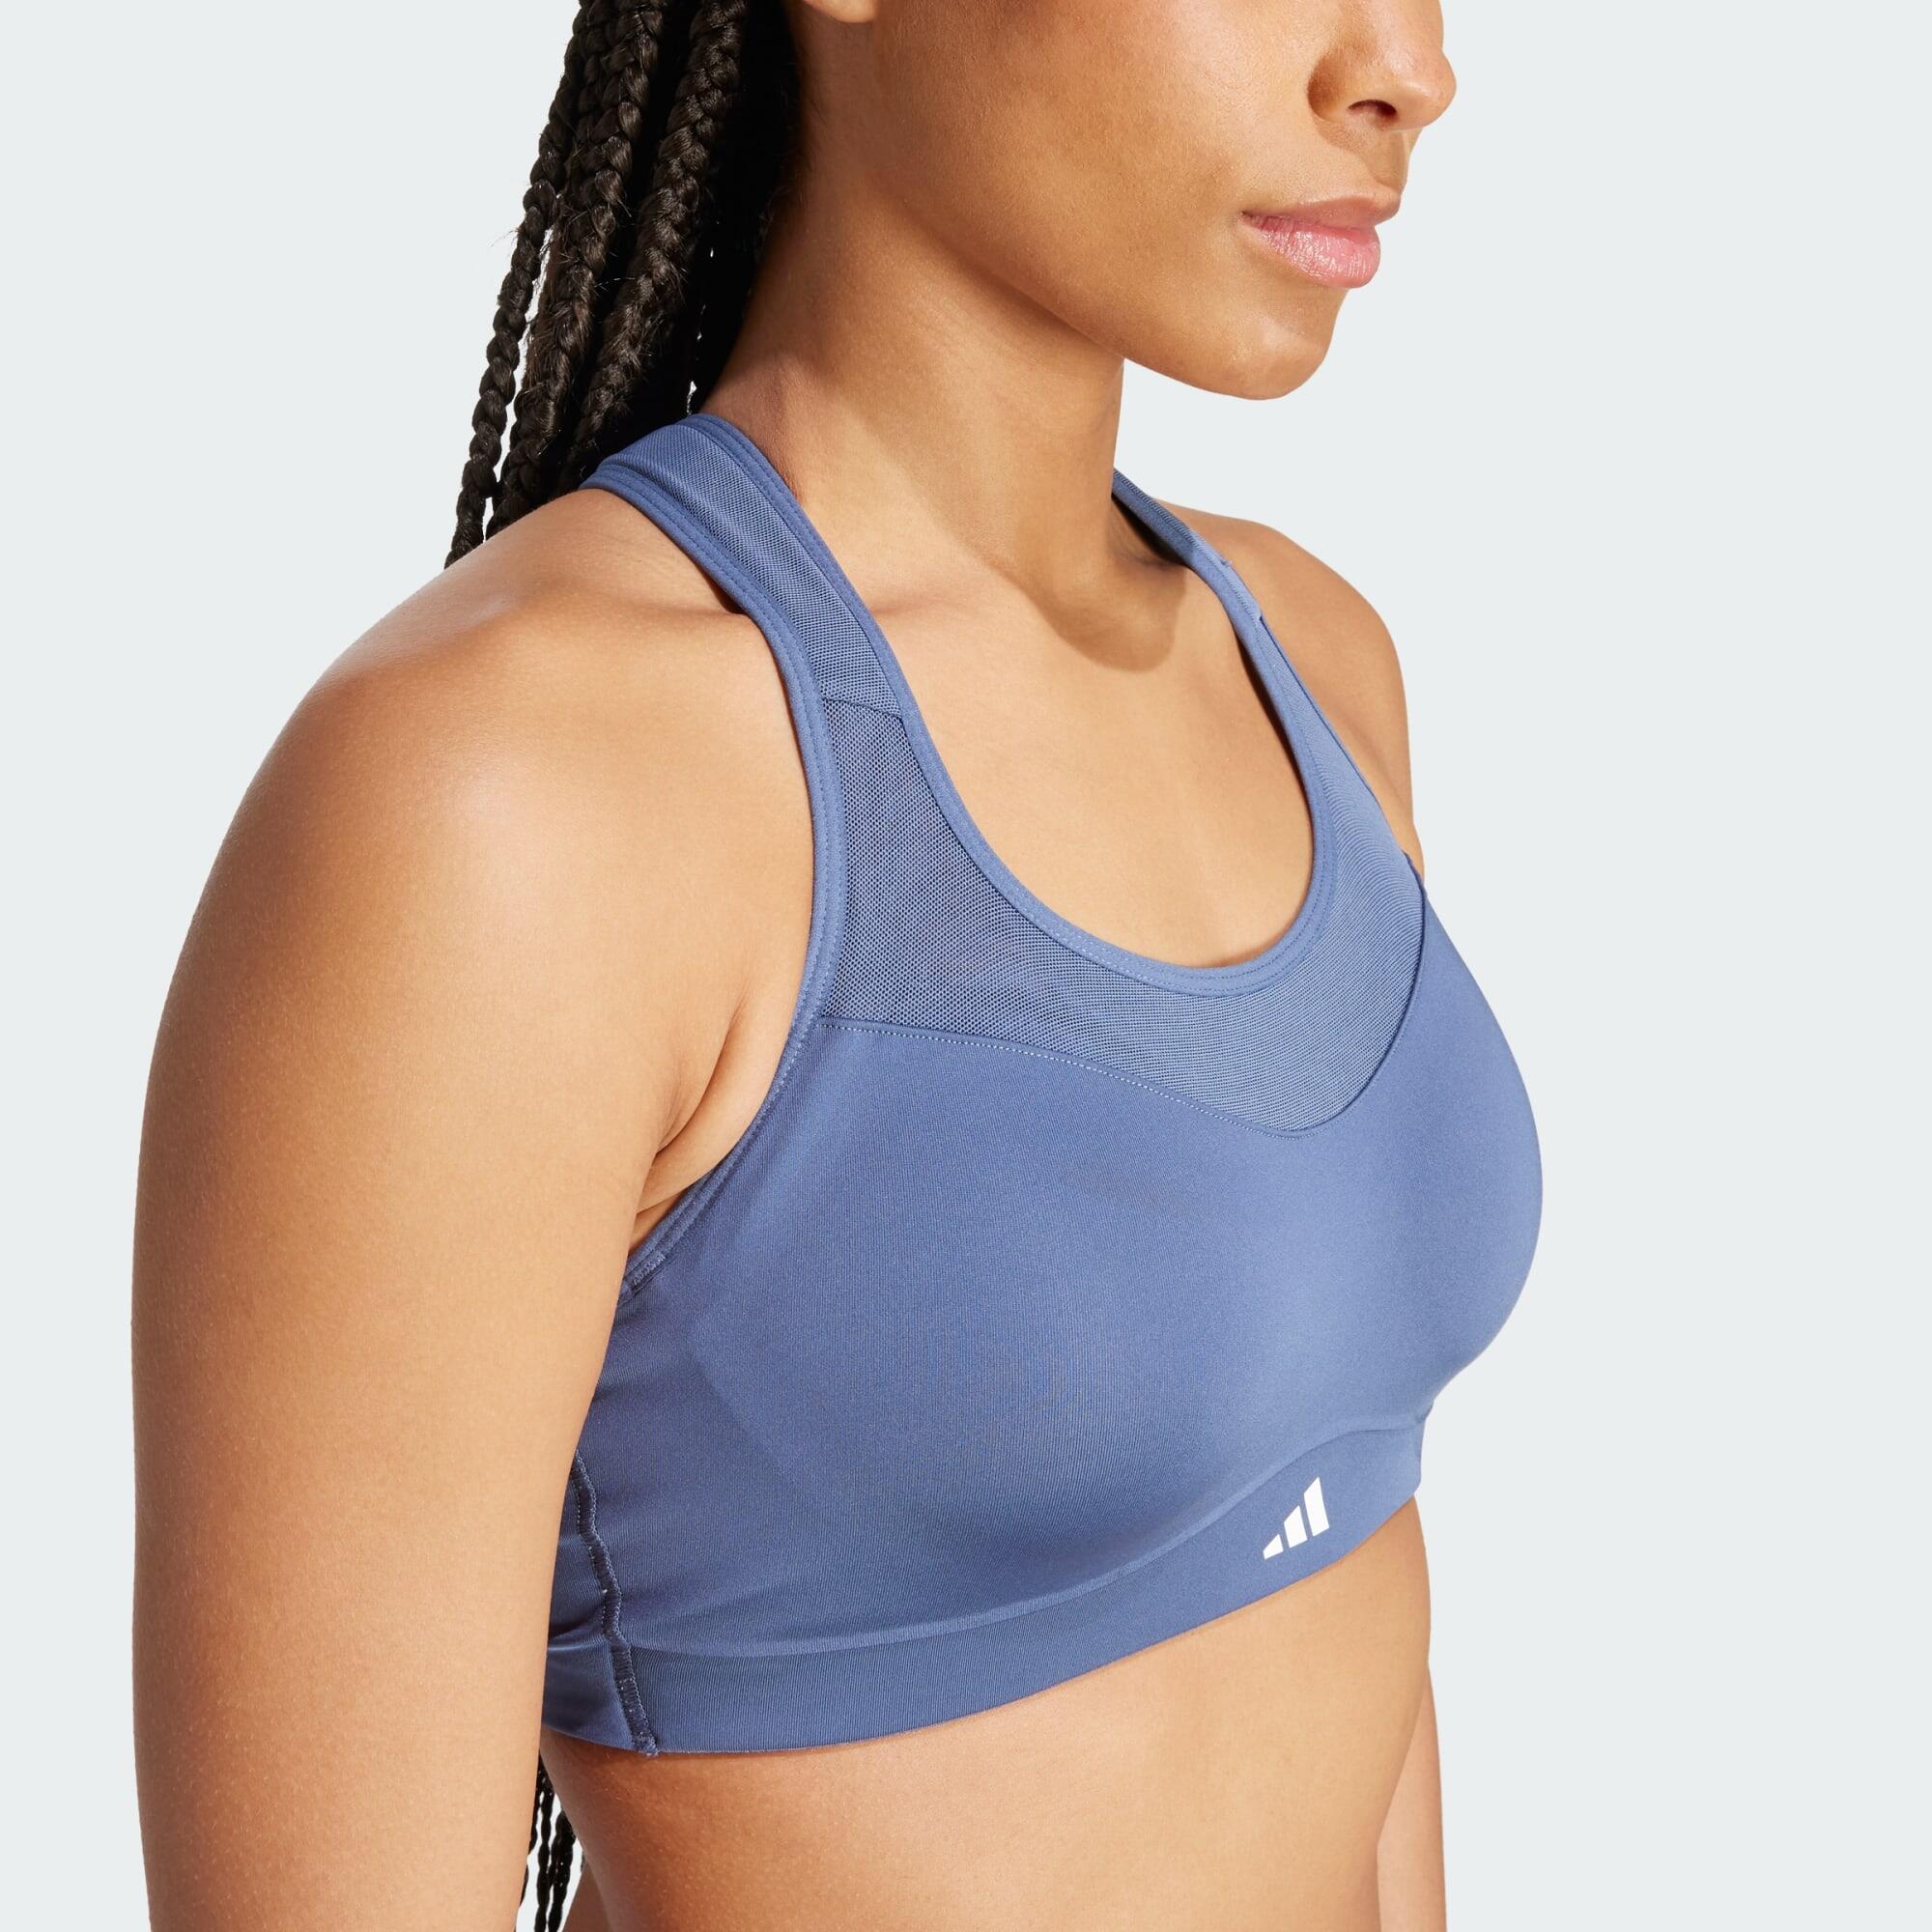 TLRD Impact Training High-Support Bra 5/6